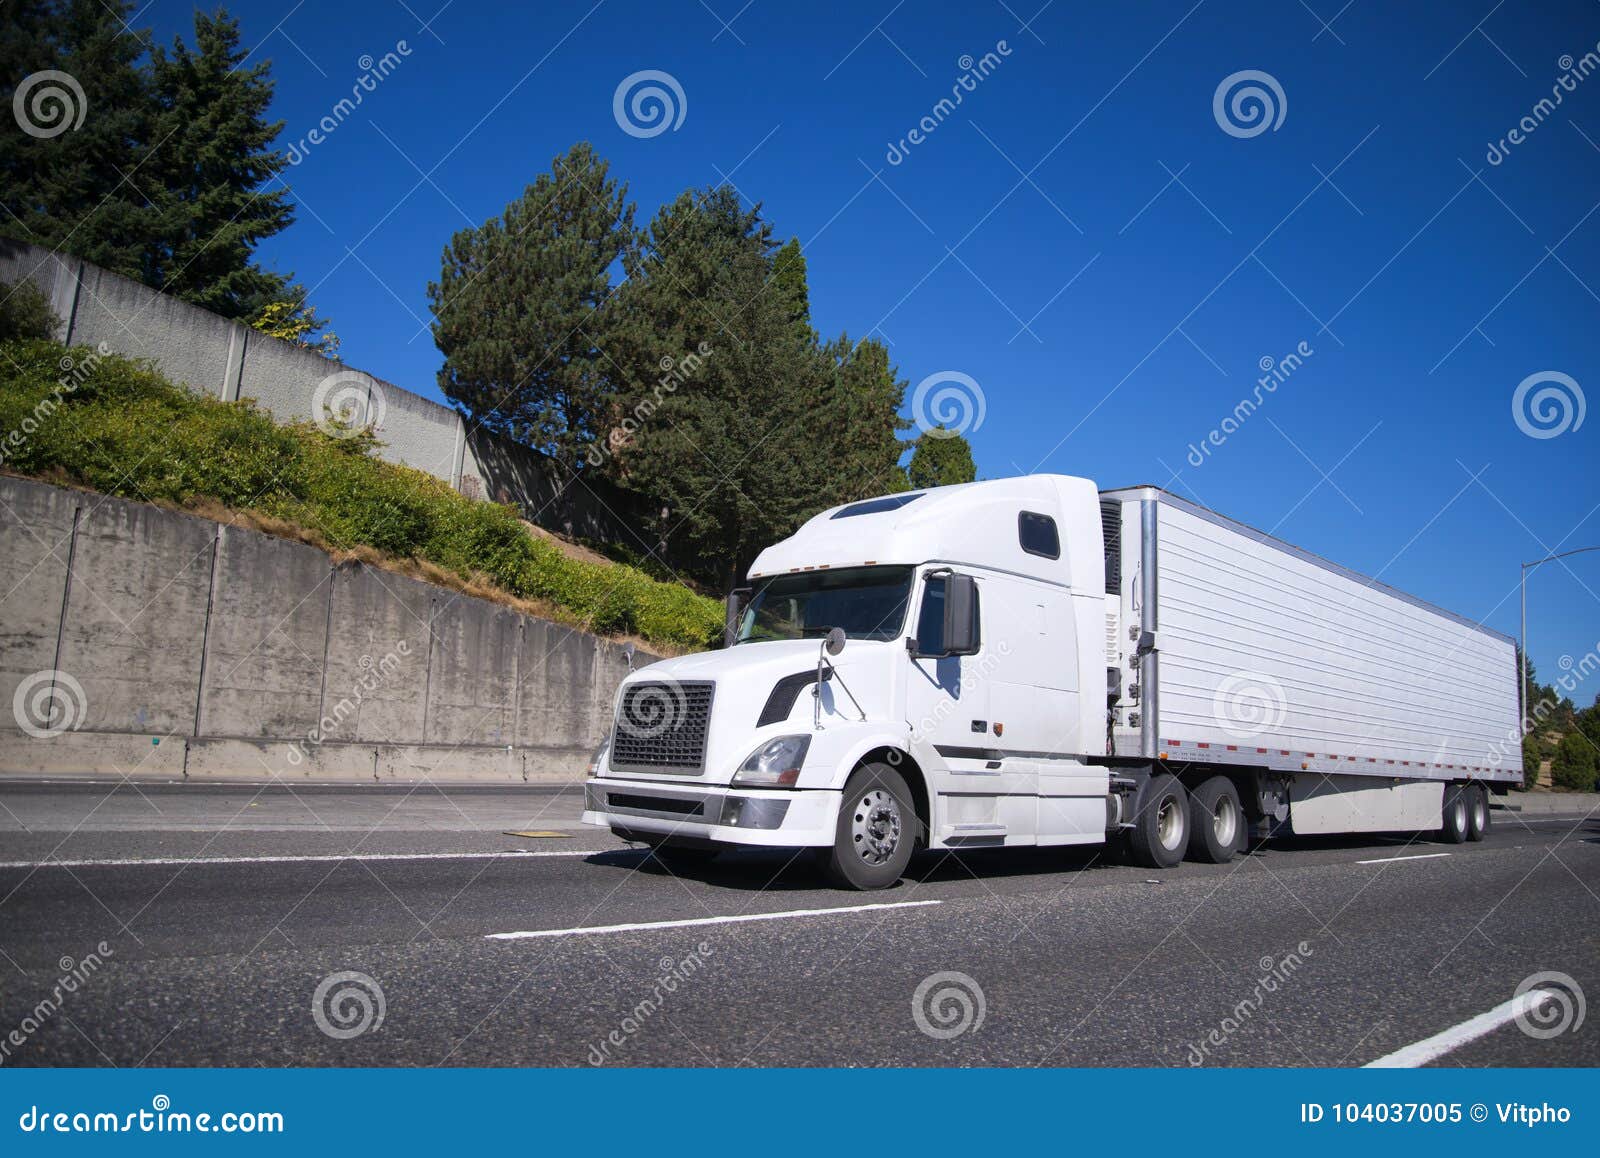 big rig semi truck with reefer semi trailer going on highway wit